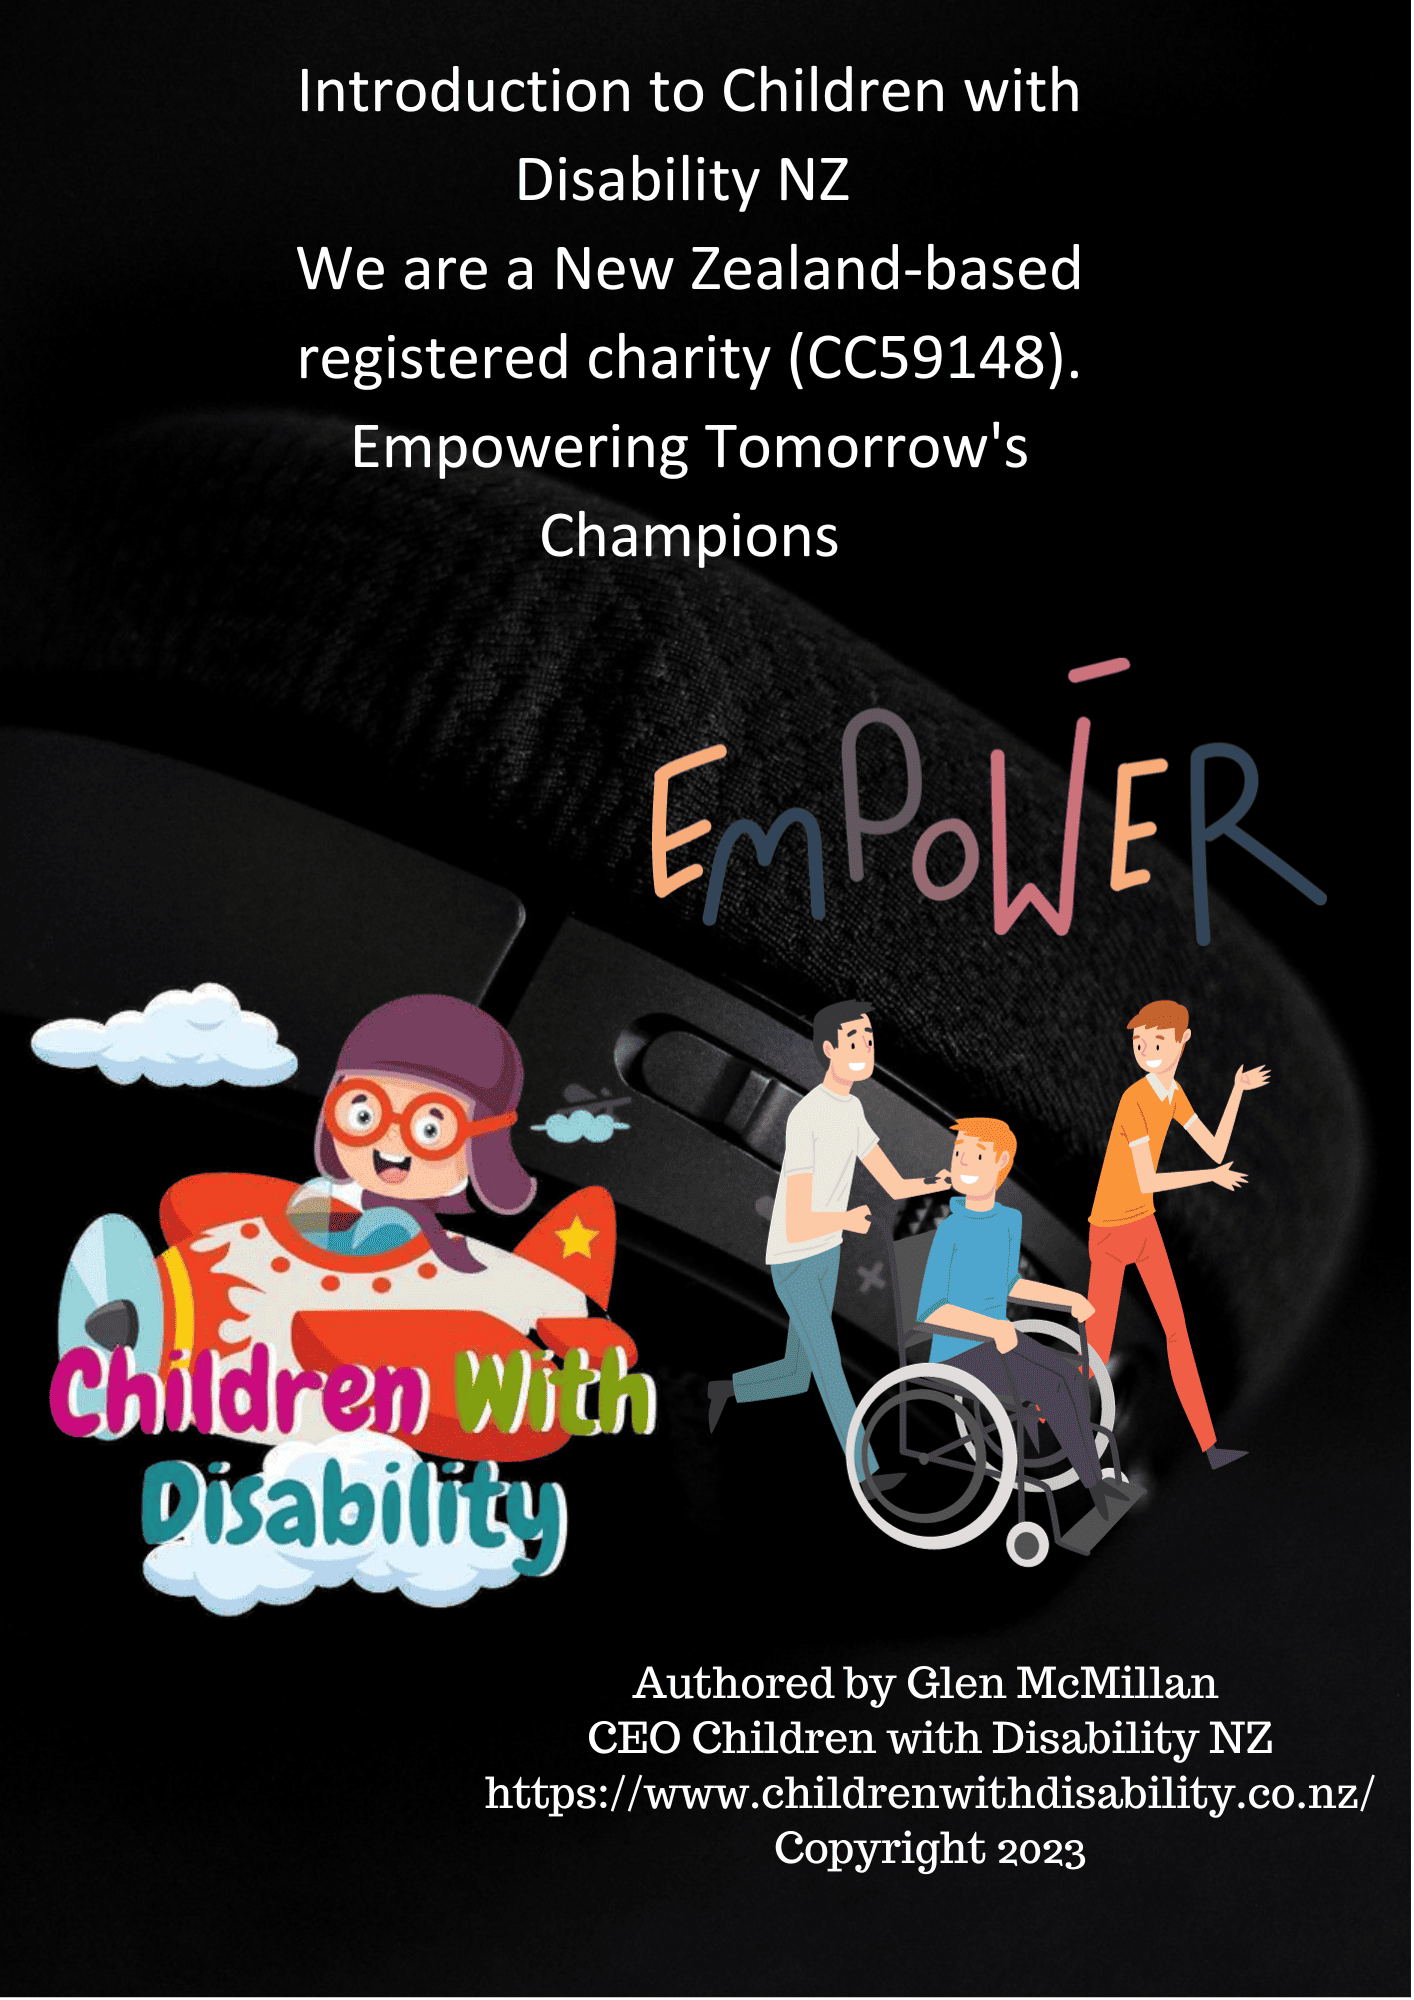 Children with Disability NZ Empowering Tomorrows Champions